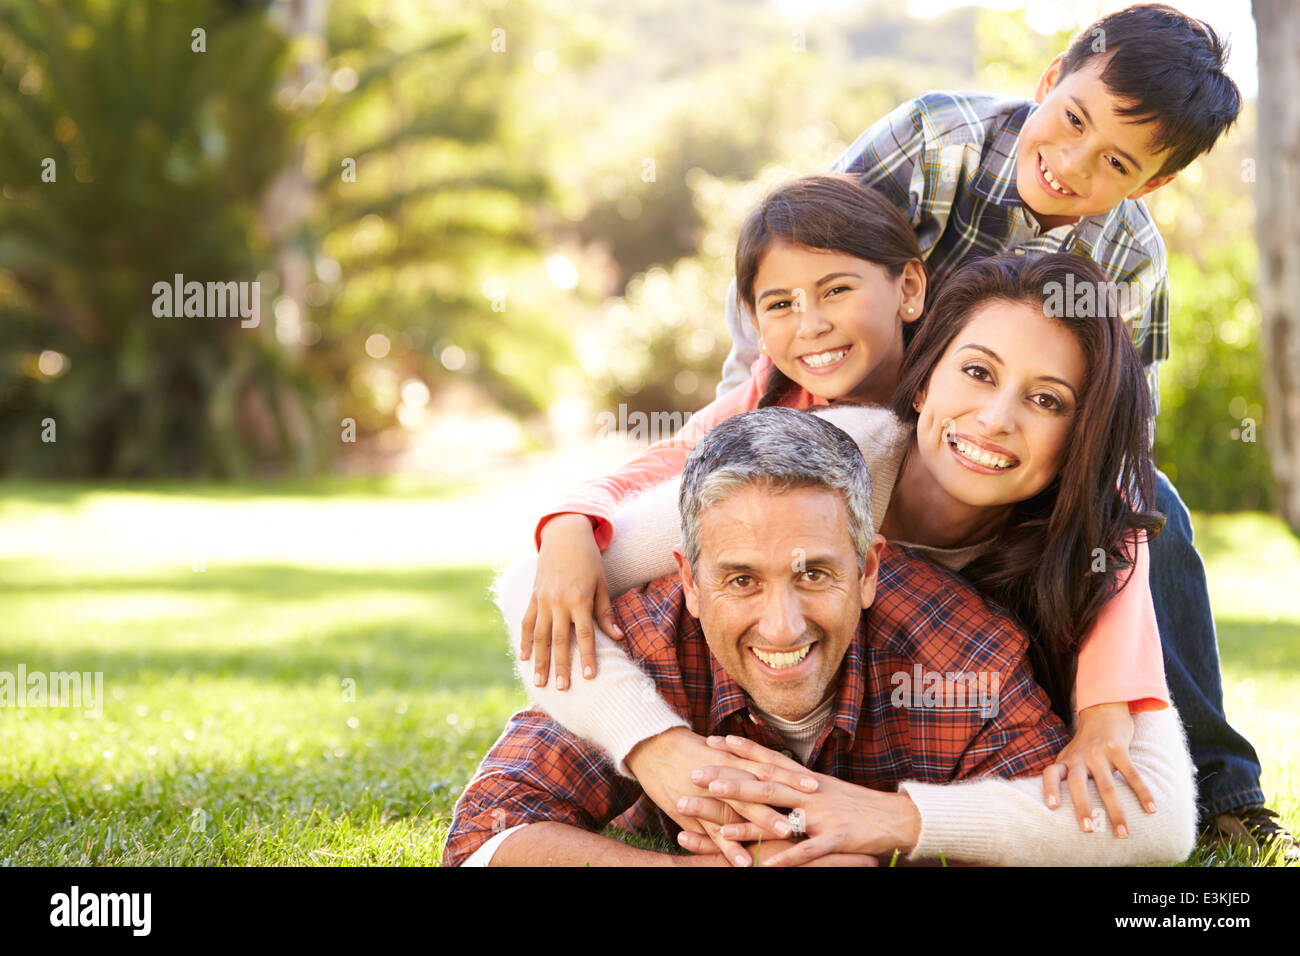 Portrait Of Family Lying On Grass In Countryside Banque D'Images